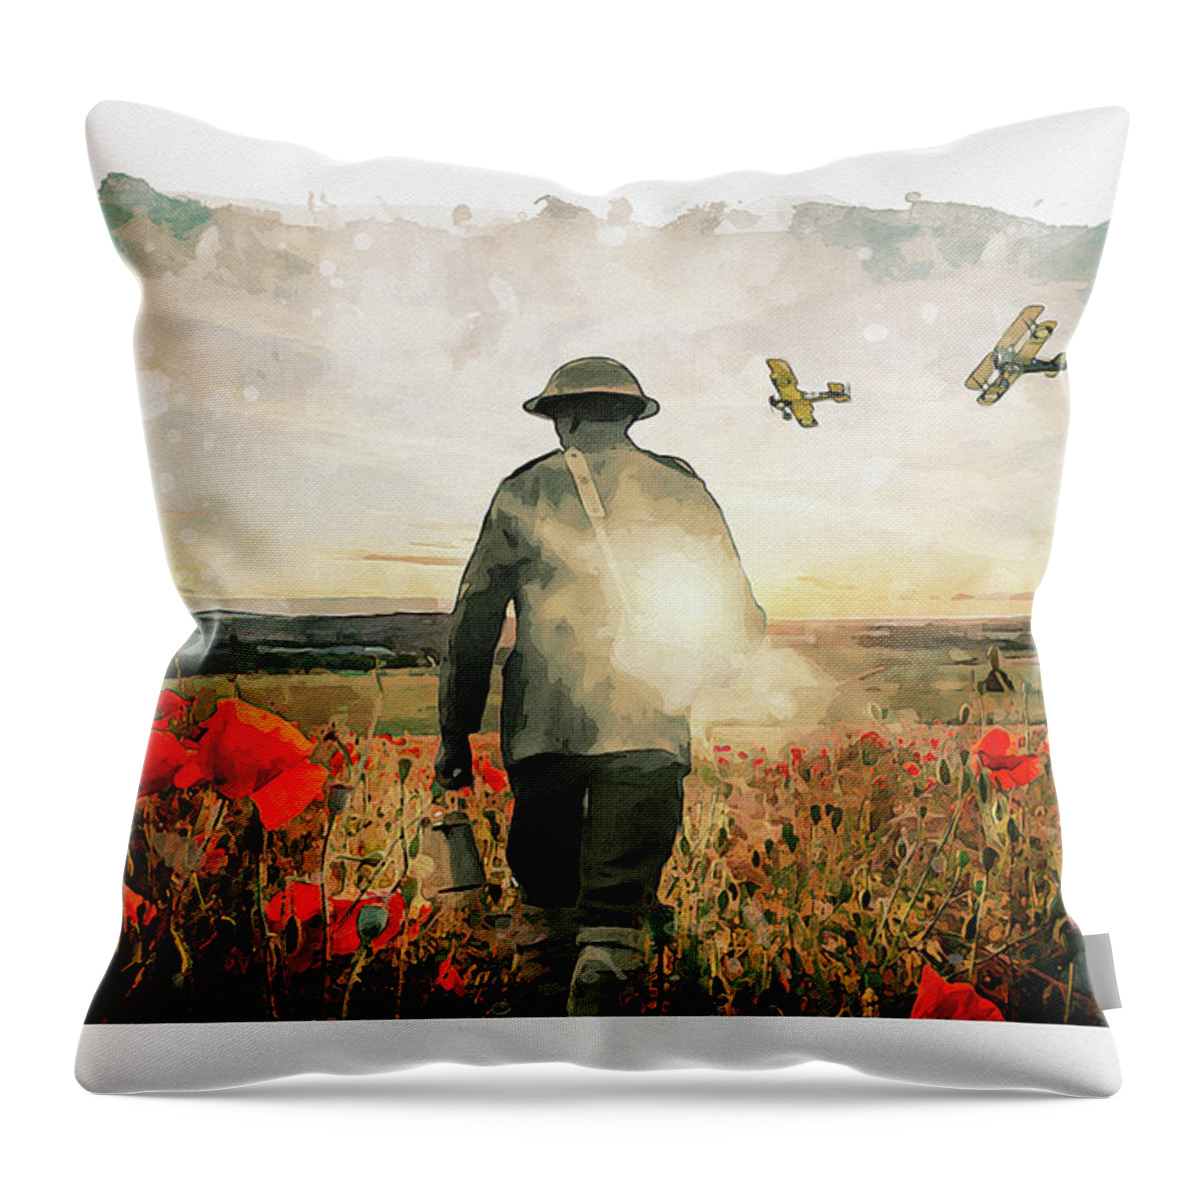 Soldier Poppies Throw Pillow featuring the digital art To End All Wars by Airpower Art